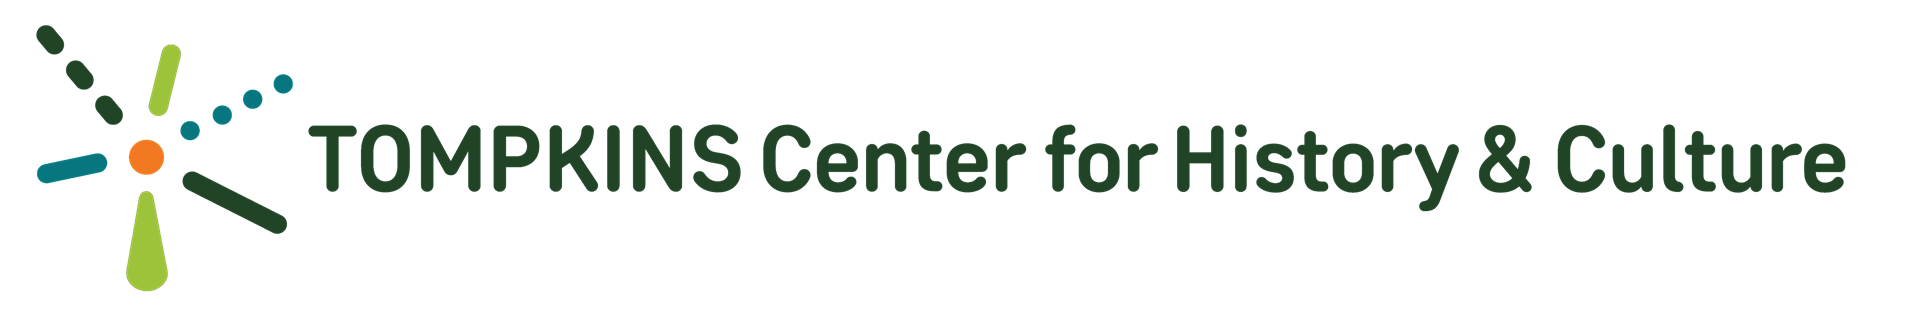 A logo that reads "TOMPKINS Center for History & Culture"